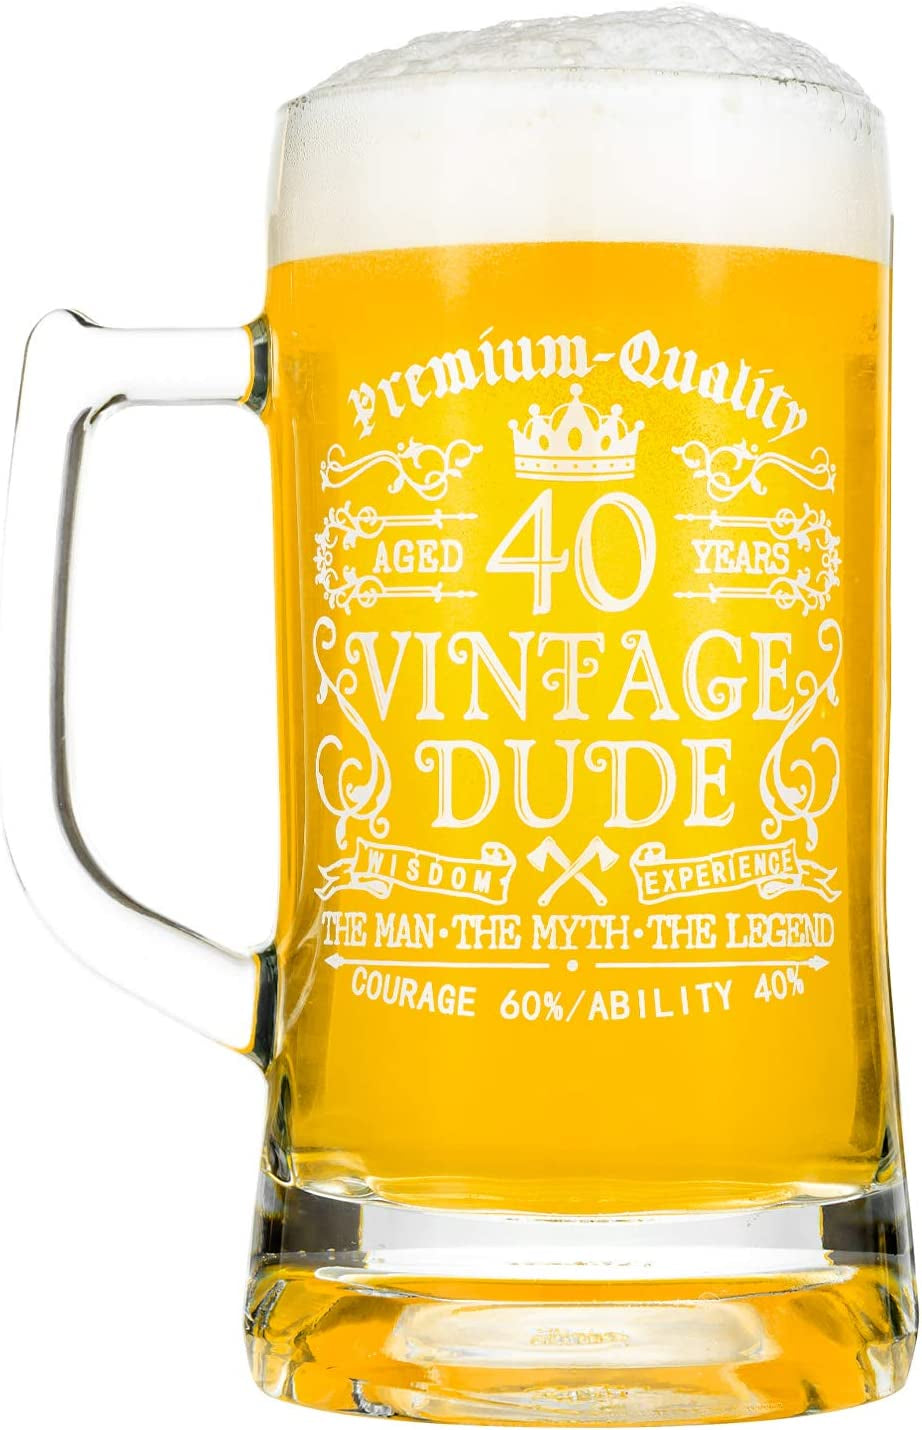 40Th Birthday Vintage Dude Beer Mug for Men 40 Years Old Gift 21 Oz Birthday Beer Glass for Him, Husband, Father, Brother Friends Uncle Coworker, Large Capacity Beer Mug Gift, with Box